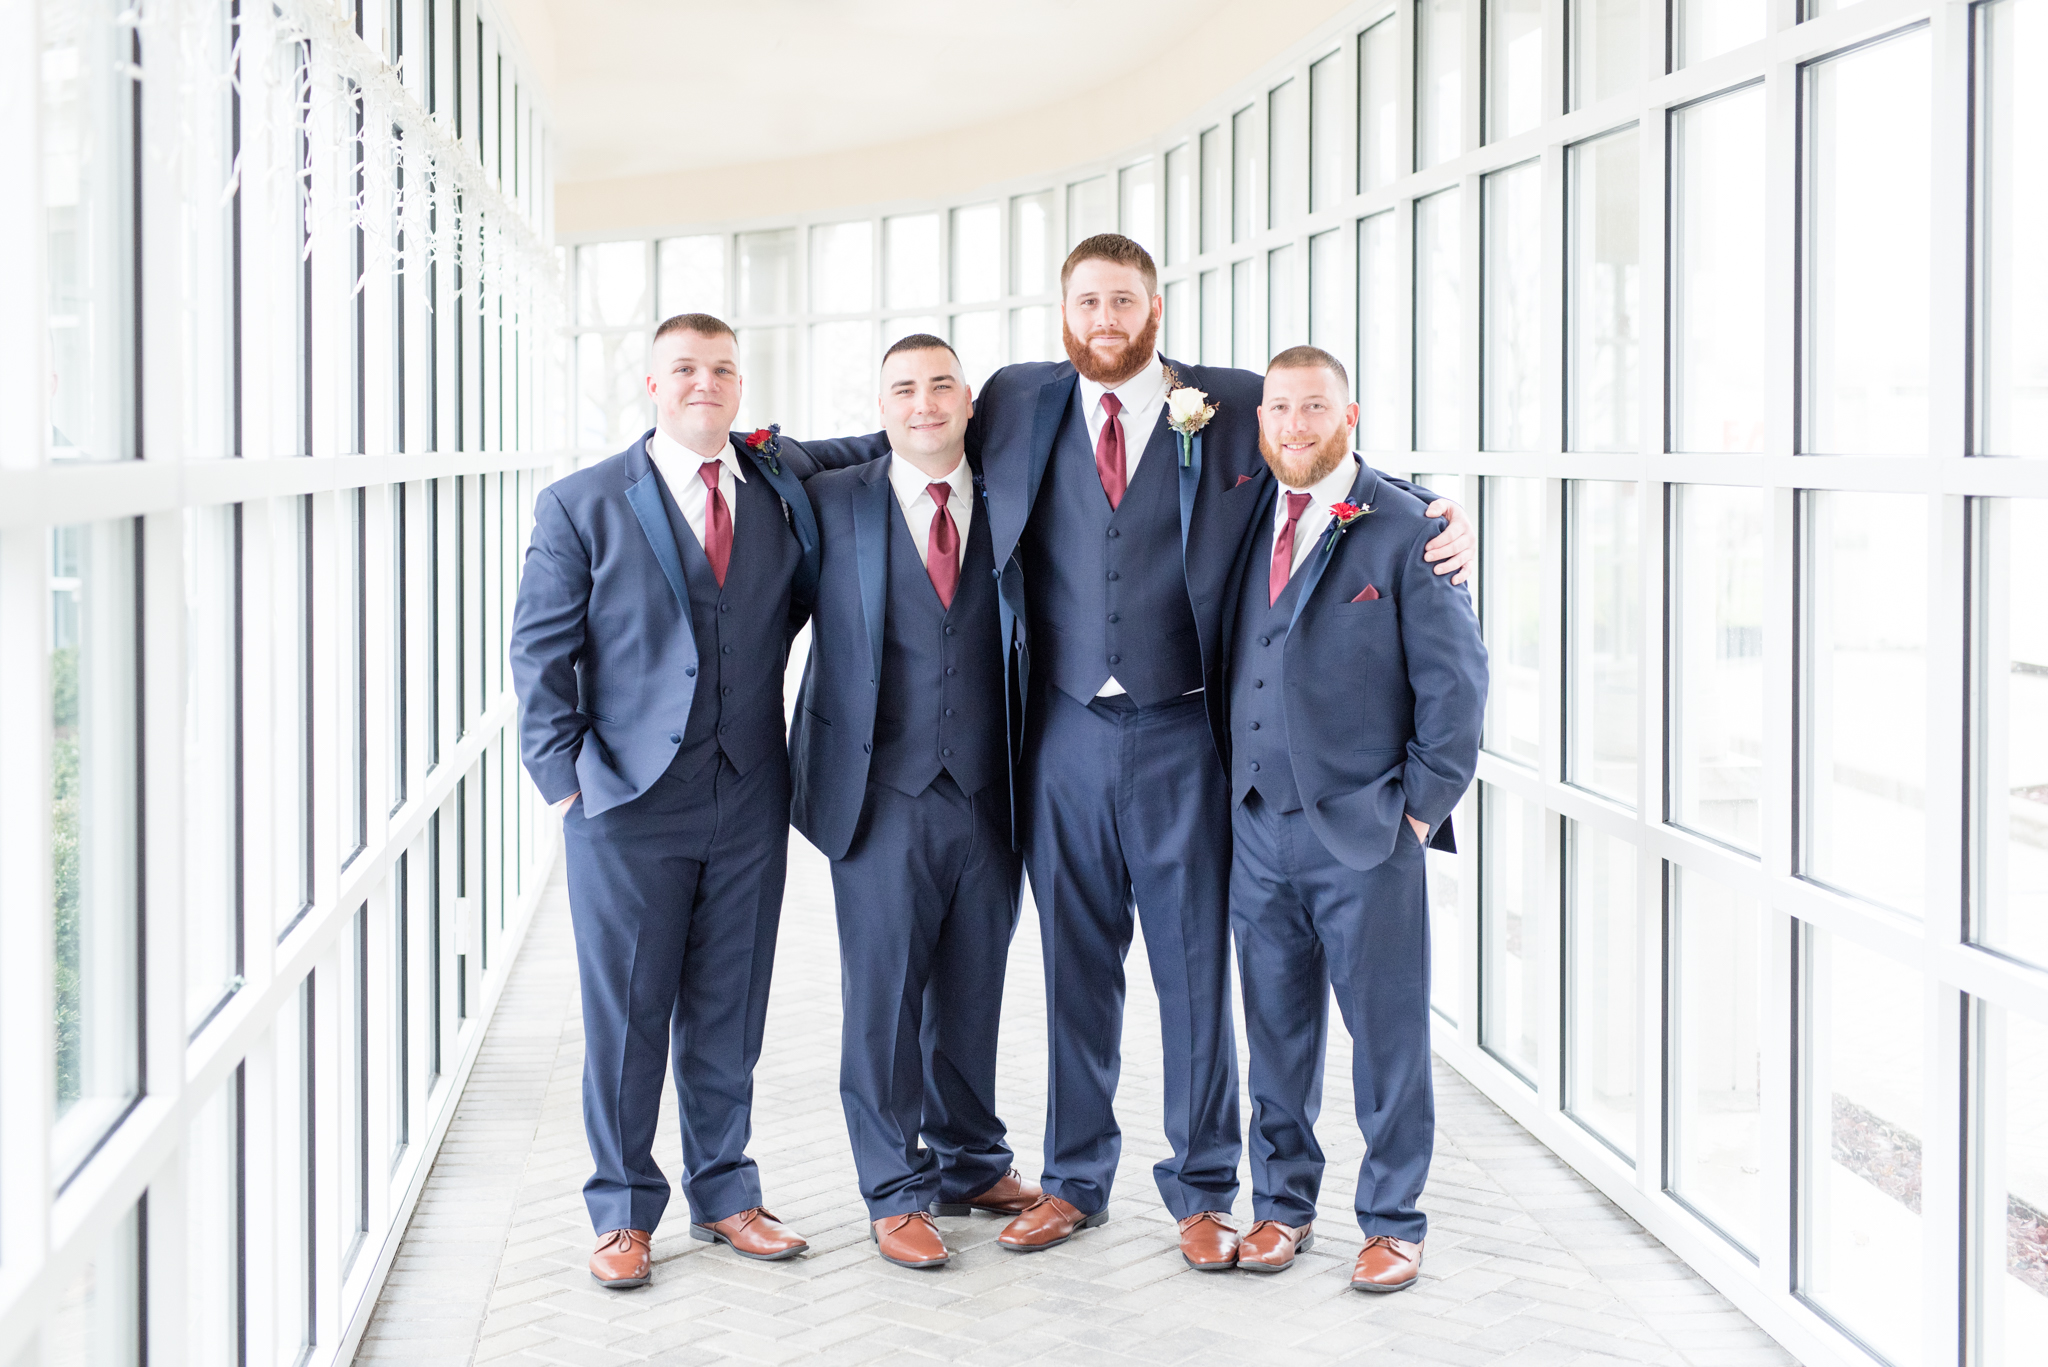 Groom and groomsmen put arms around each other.